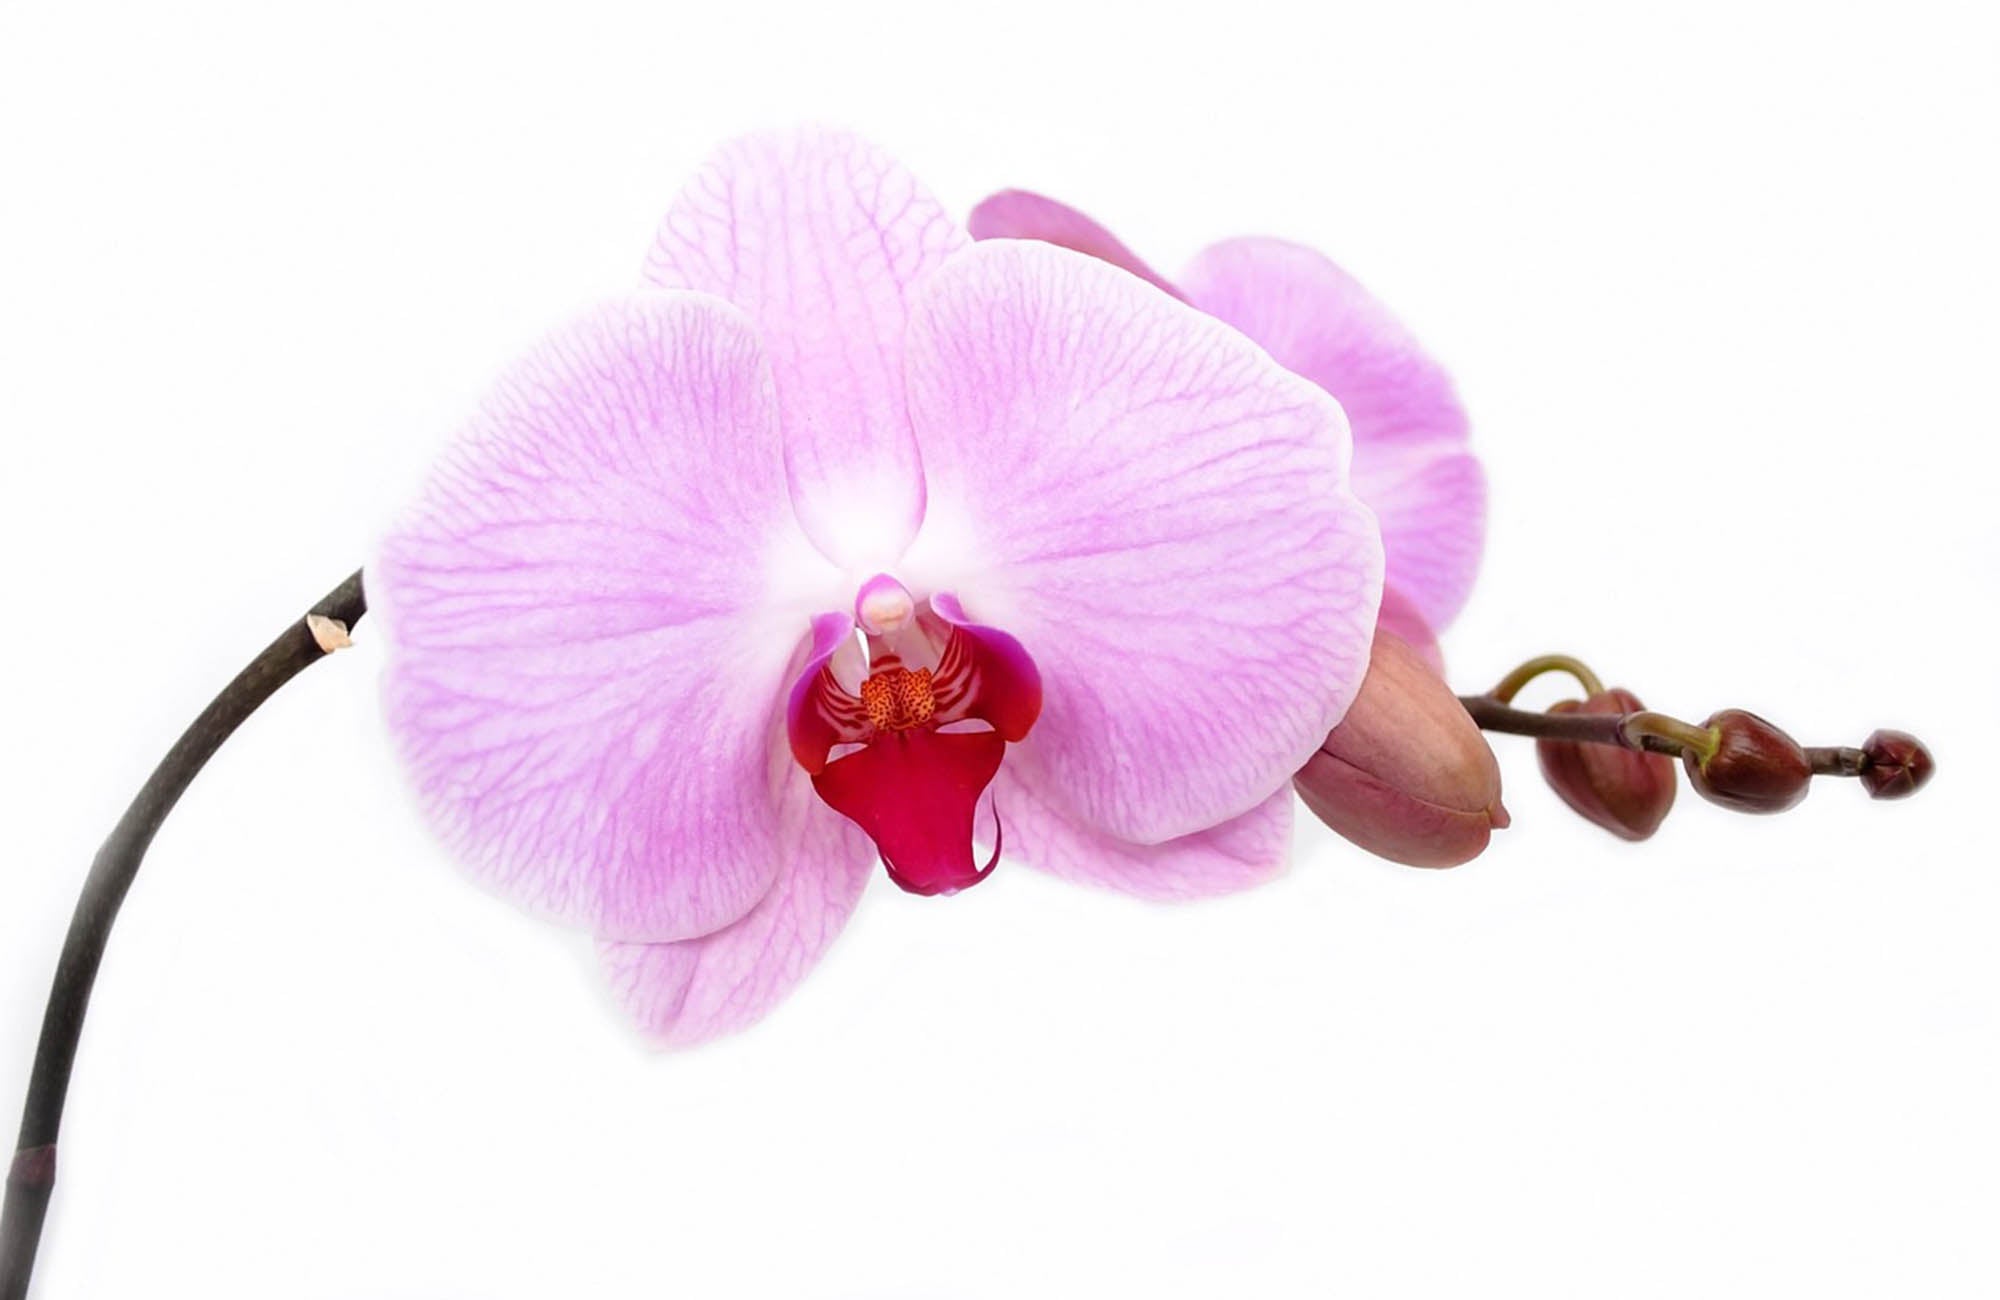 Orchid flower on stem in purple colour